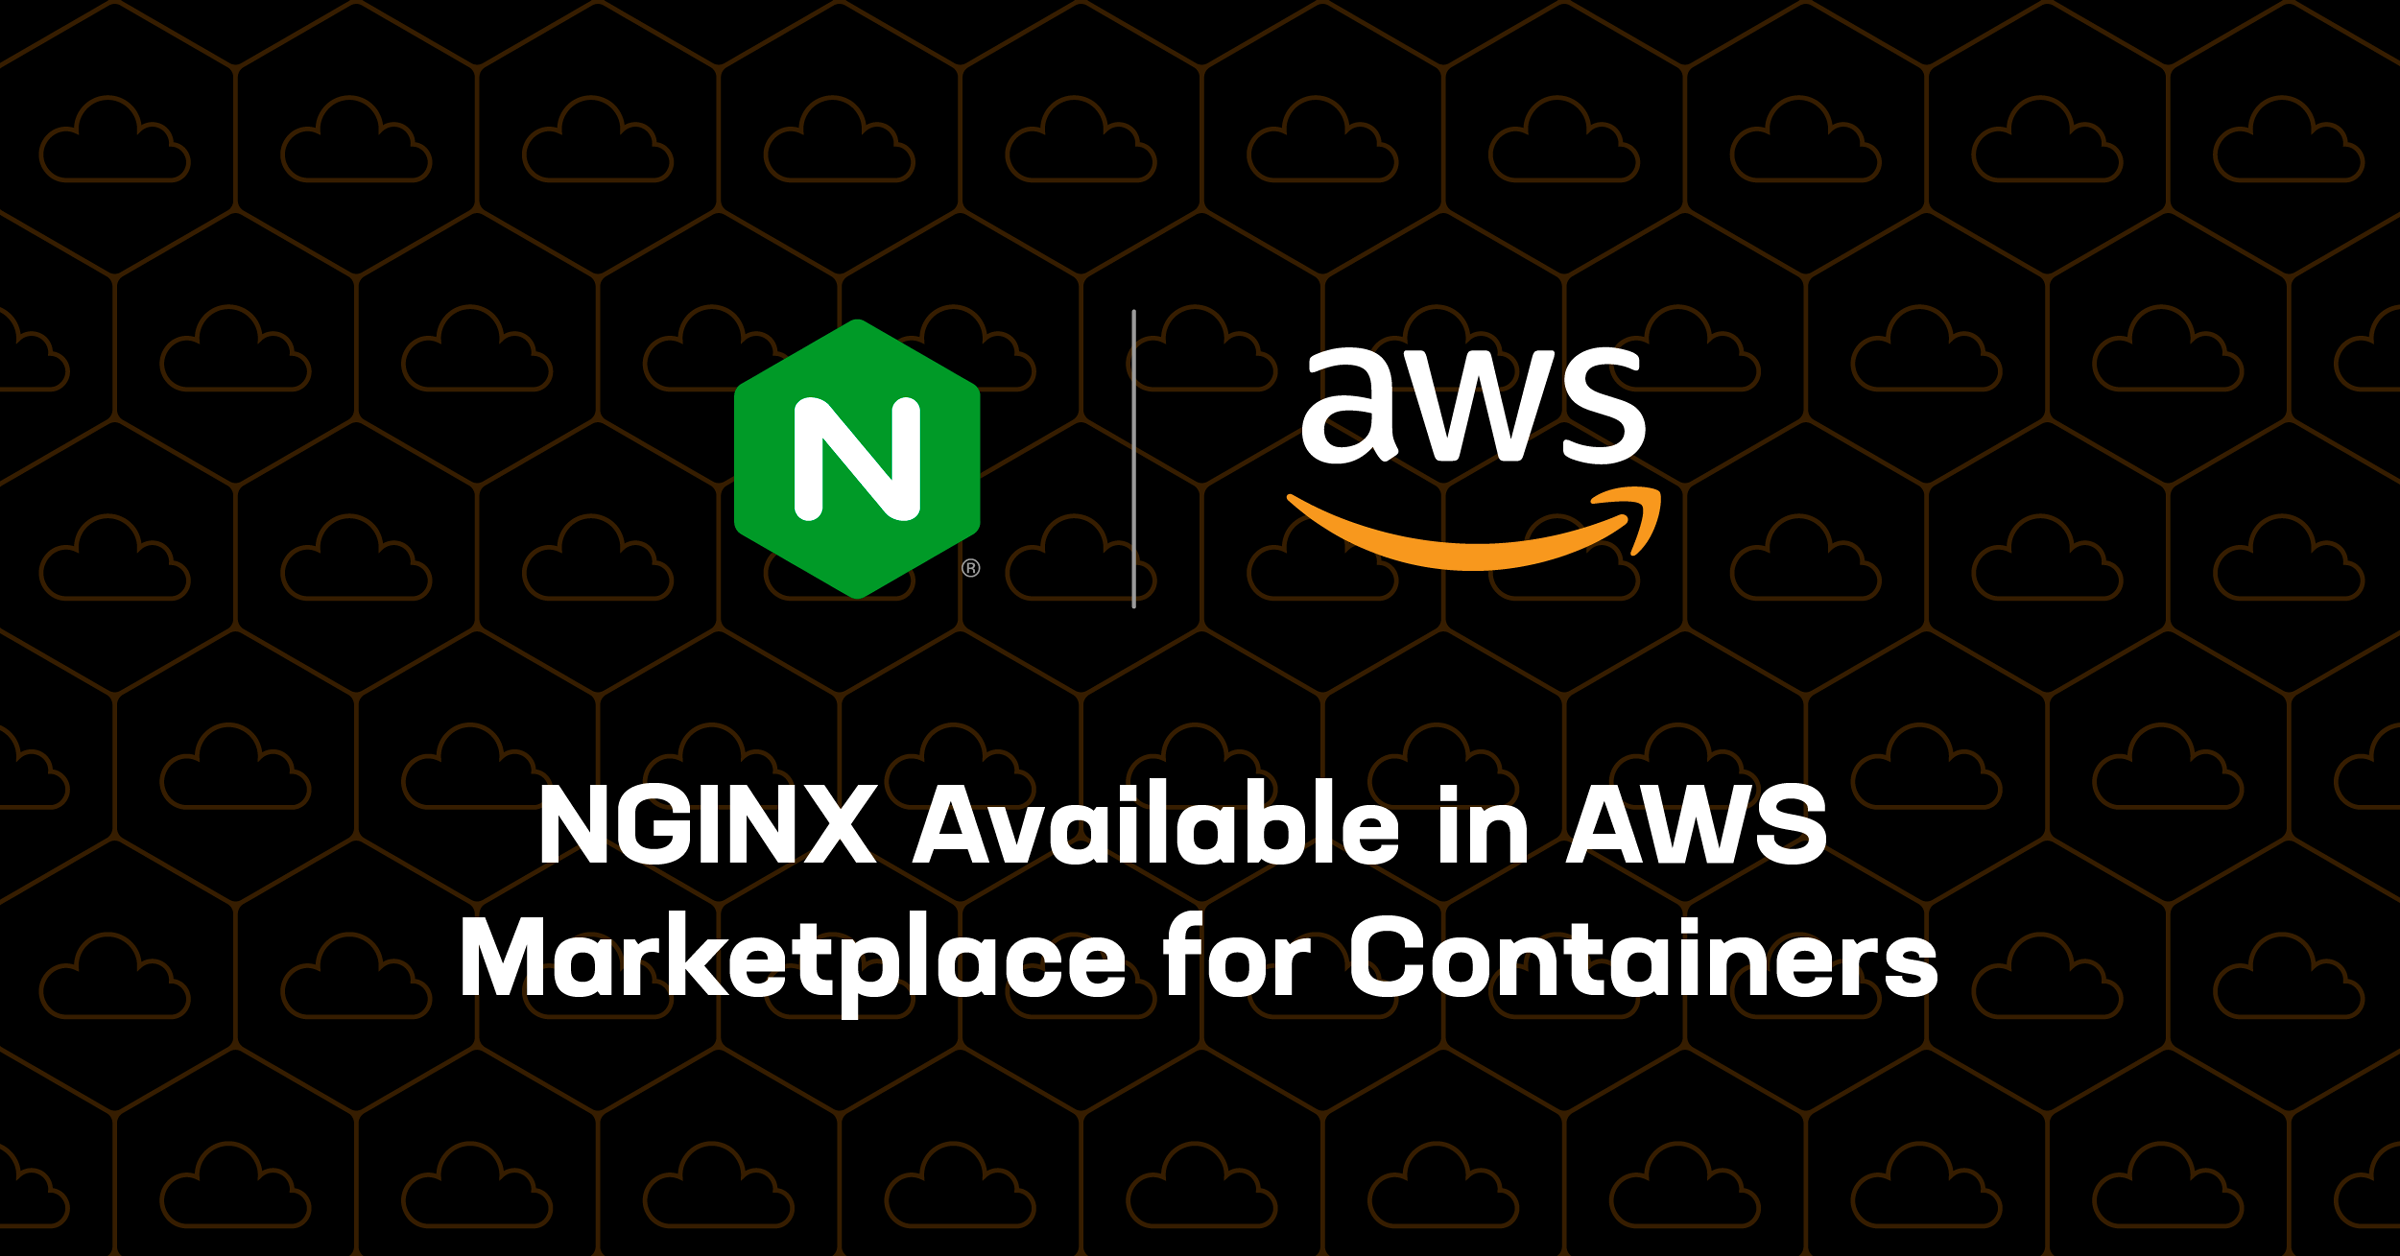 NGINX Is Available in AWS Marketplace for Containers 